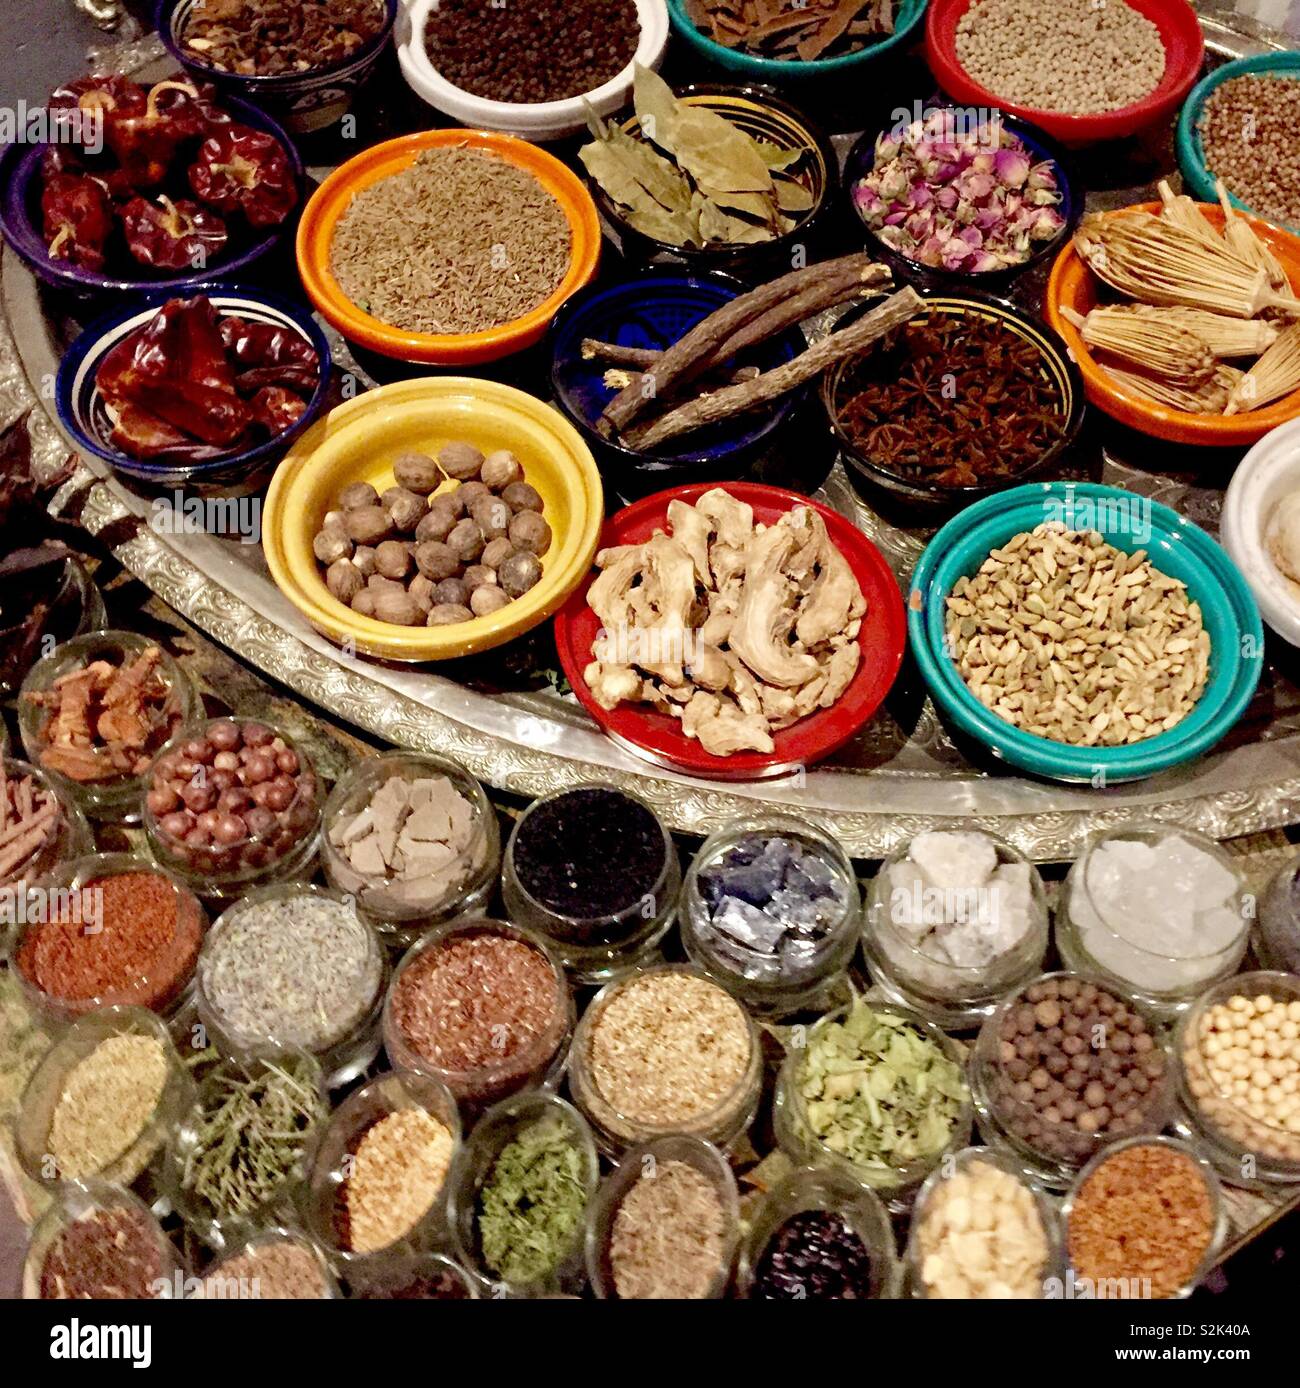 Collection of Moroccan spices Stock Photo